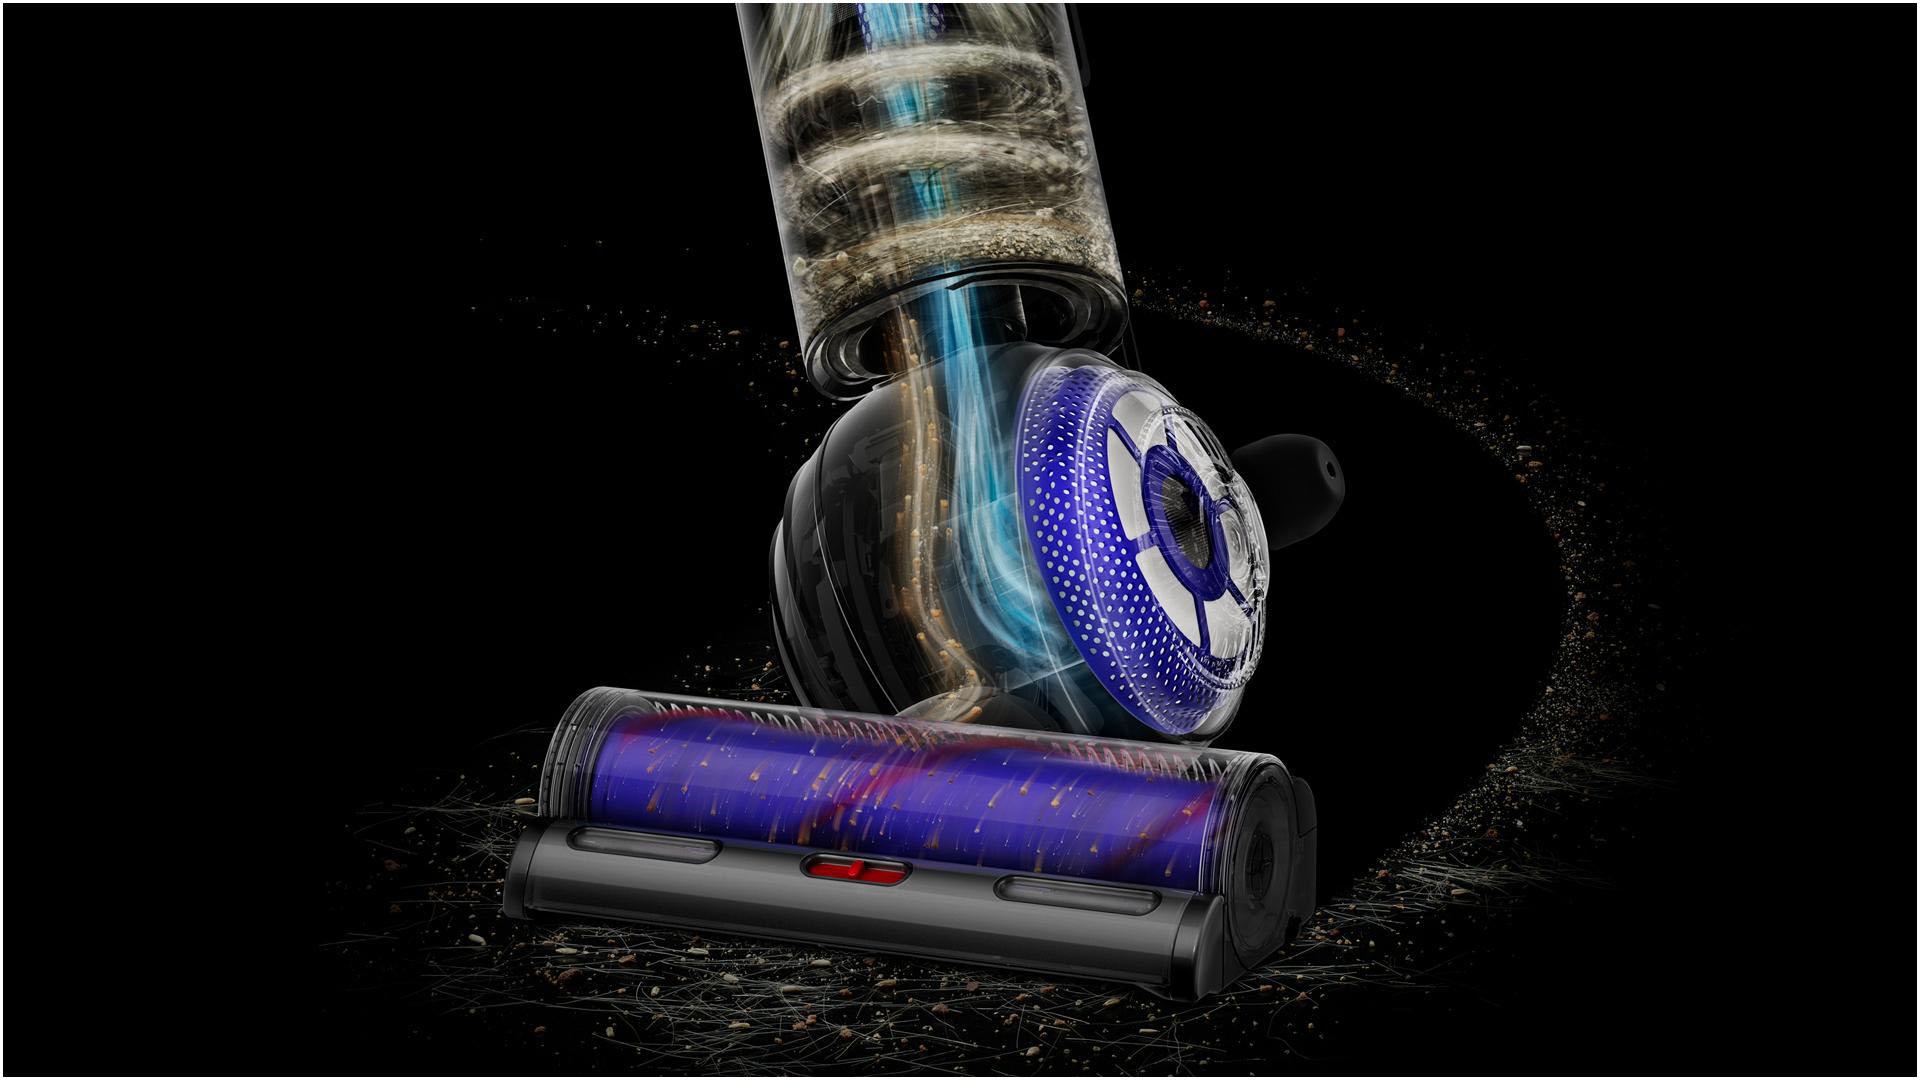 Inside diagram of the post-motor filter within the Dyson Ball vacuum